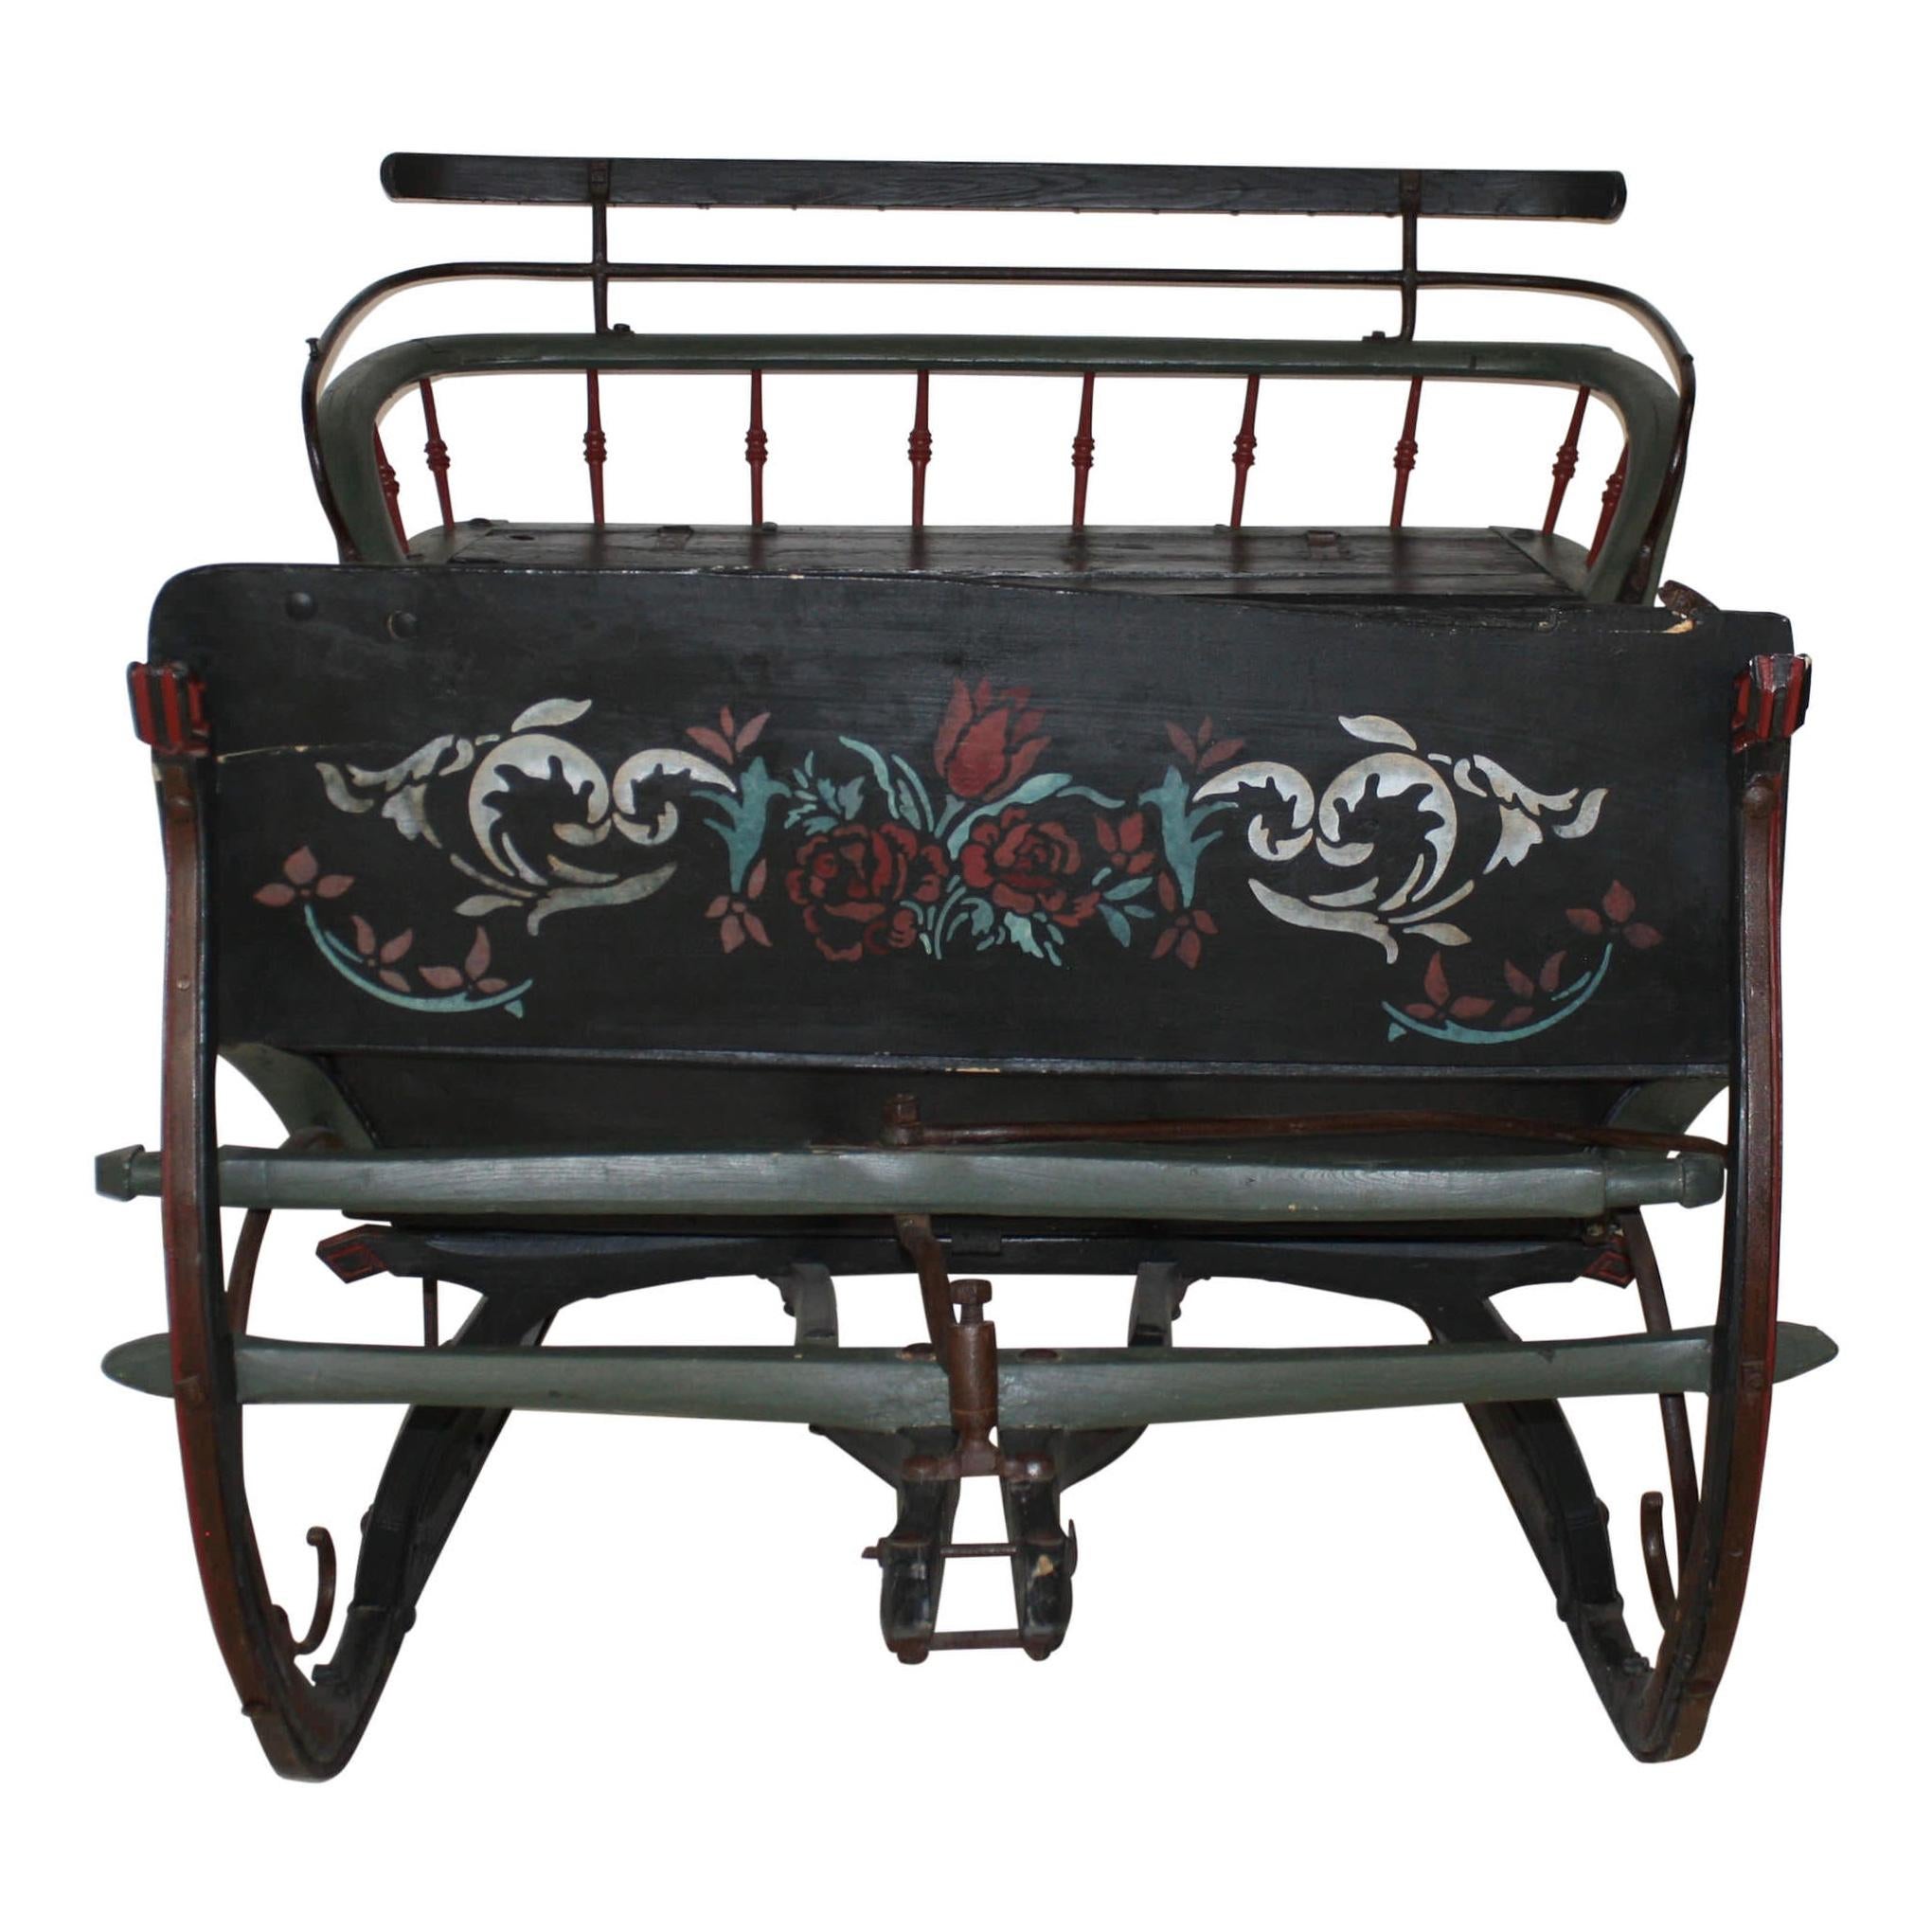 This wooden sleigh features black base paint, green and red trim, and a floral design on the dash. Spindles along the back and scrolled metalwork beneath the seat and floor boards give the sleigh a look that is less weighty than most cutters. The